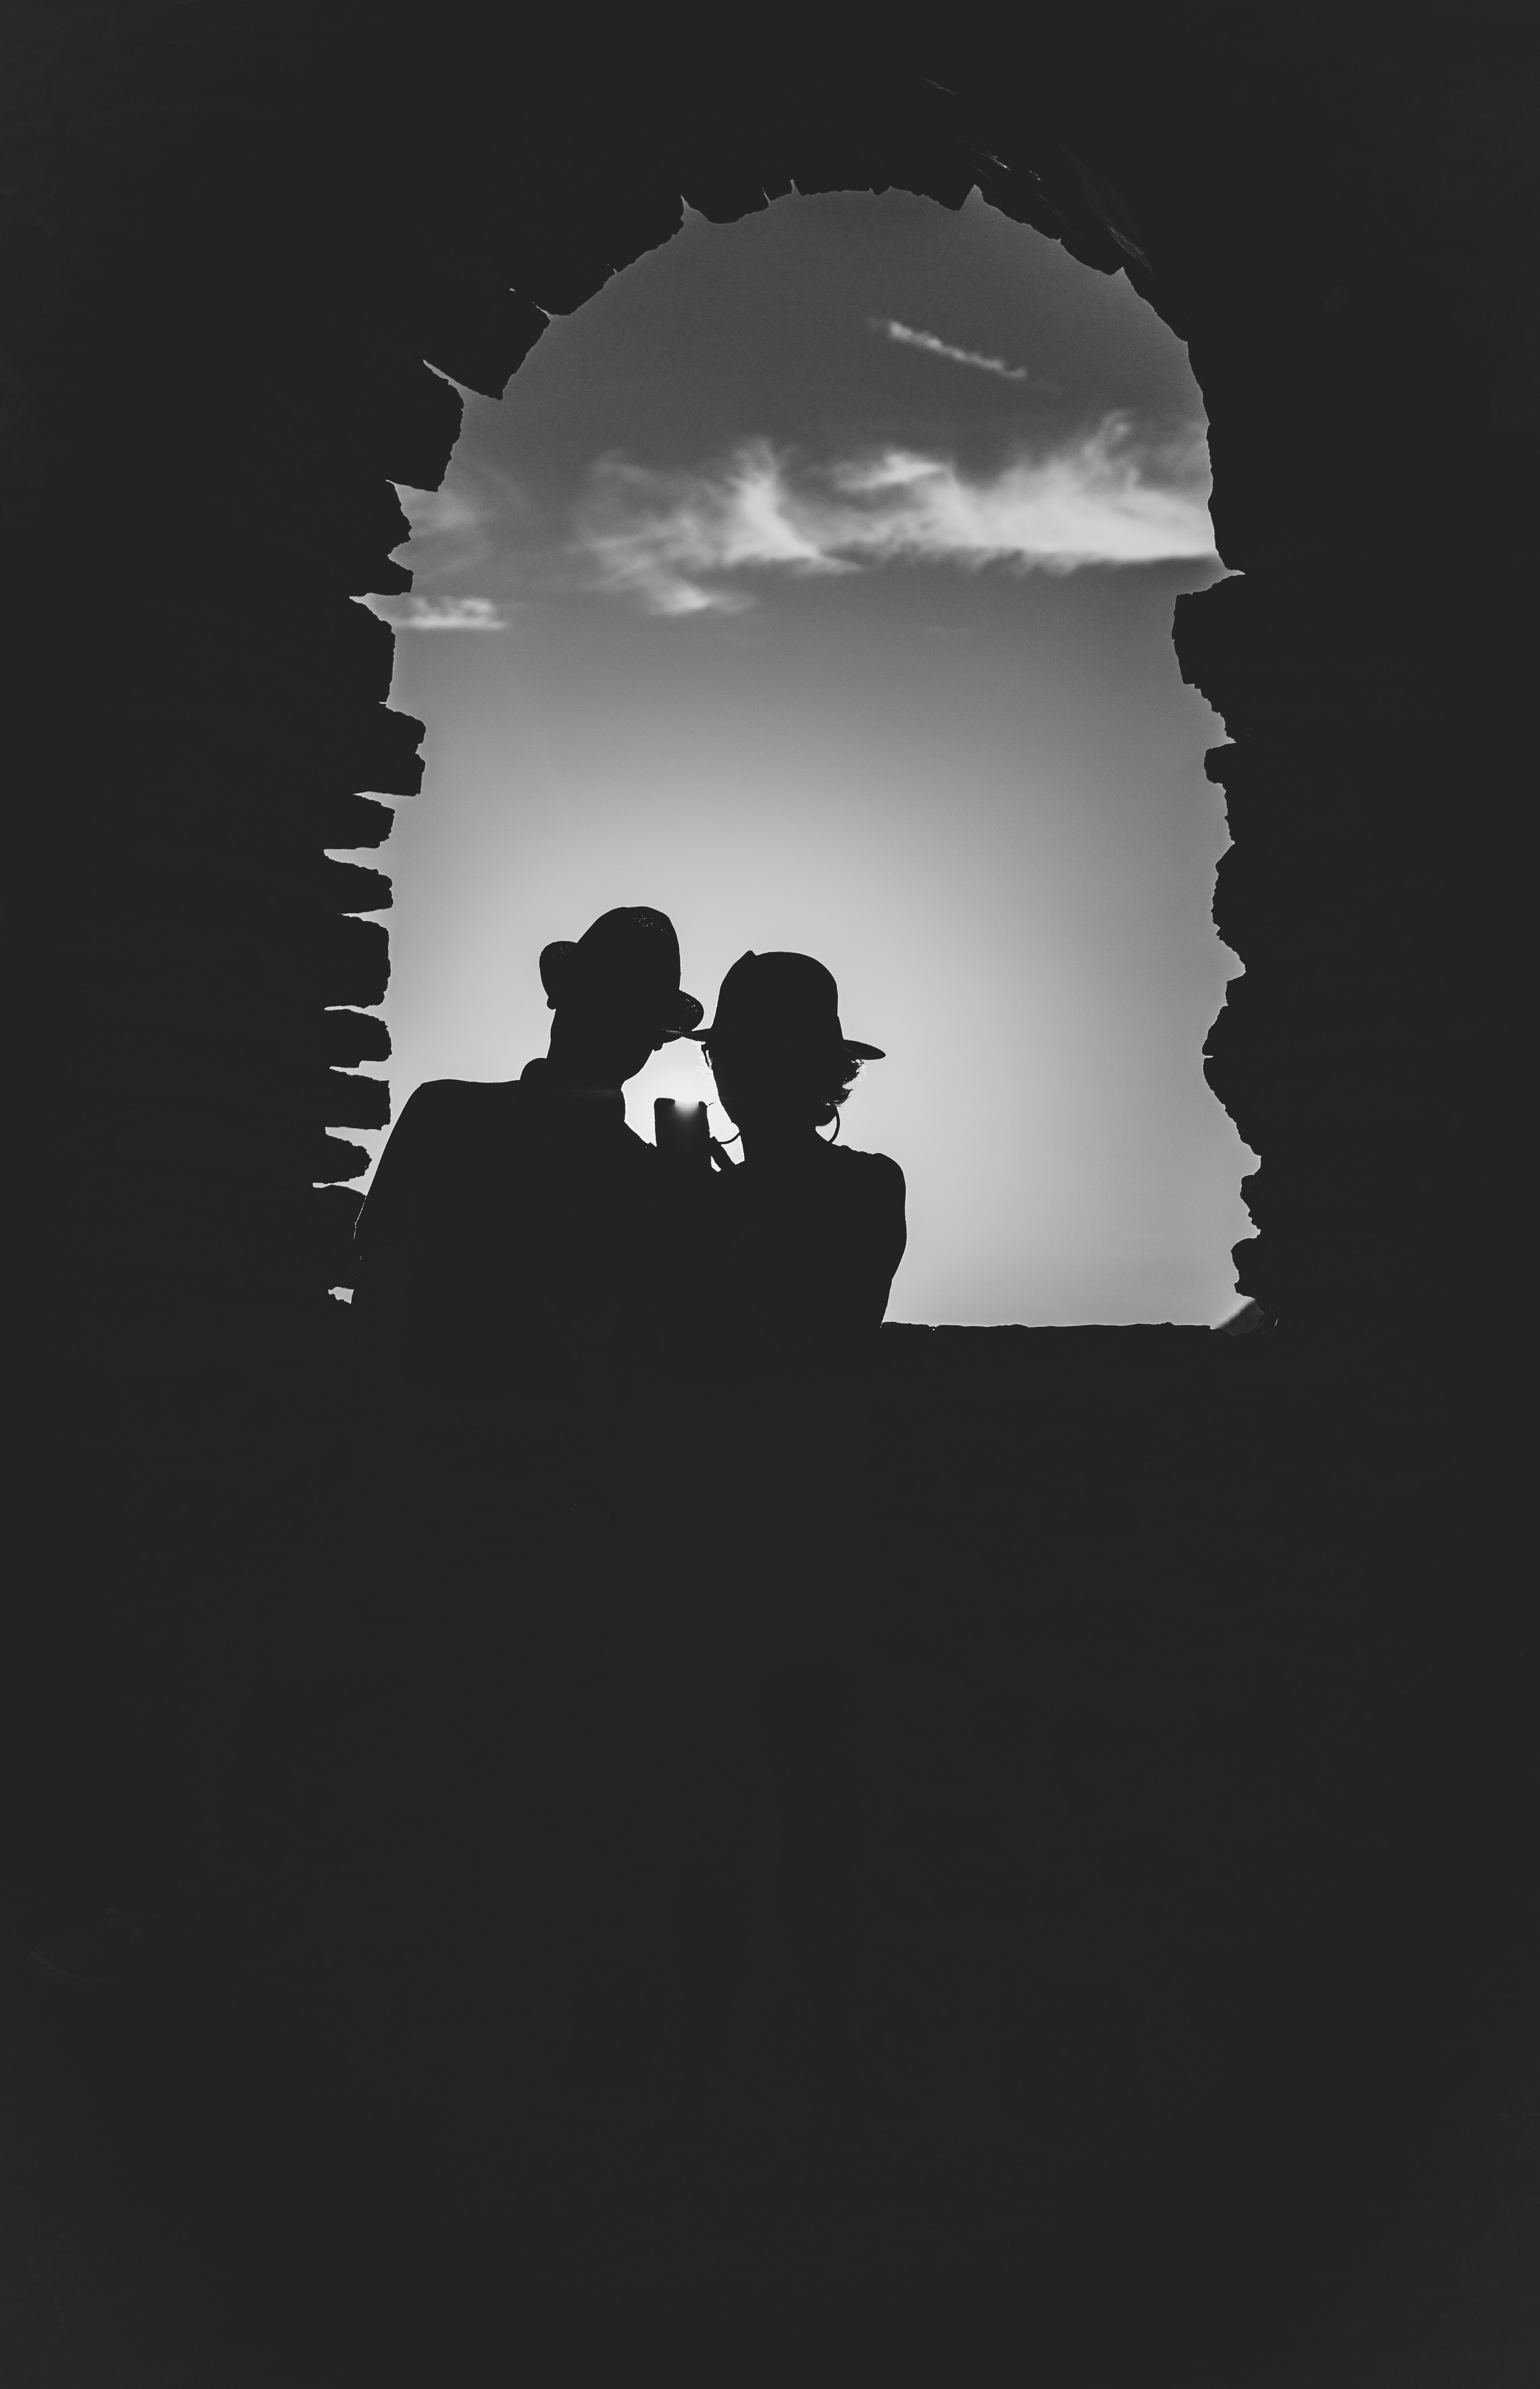 black, couple, pair, sunset, silhouettes, bw, chb, arch